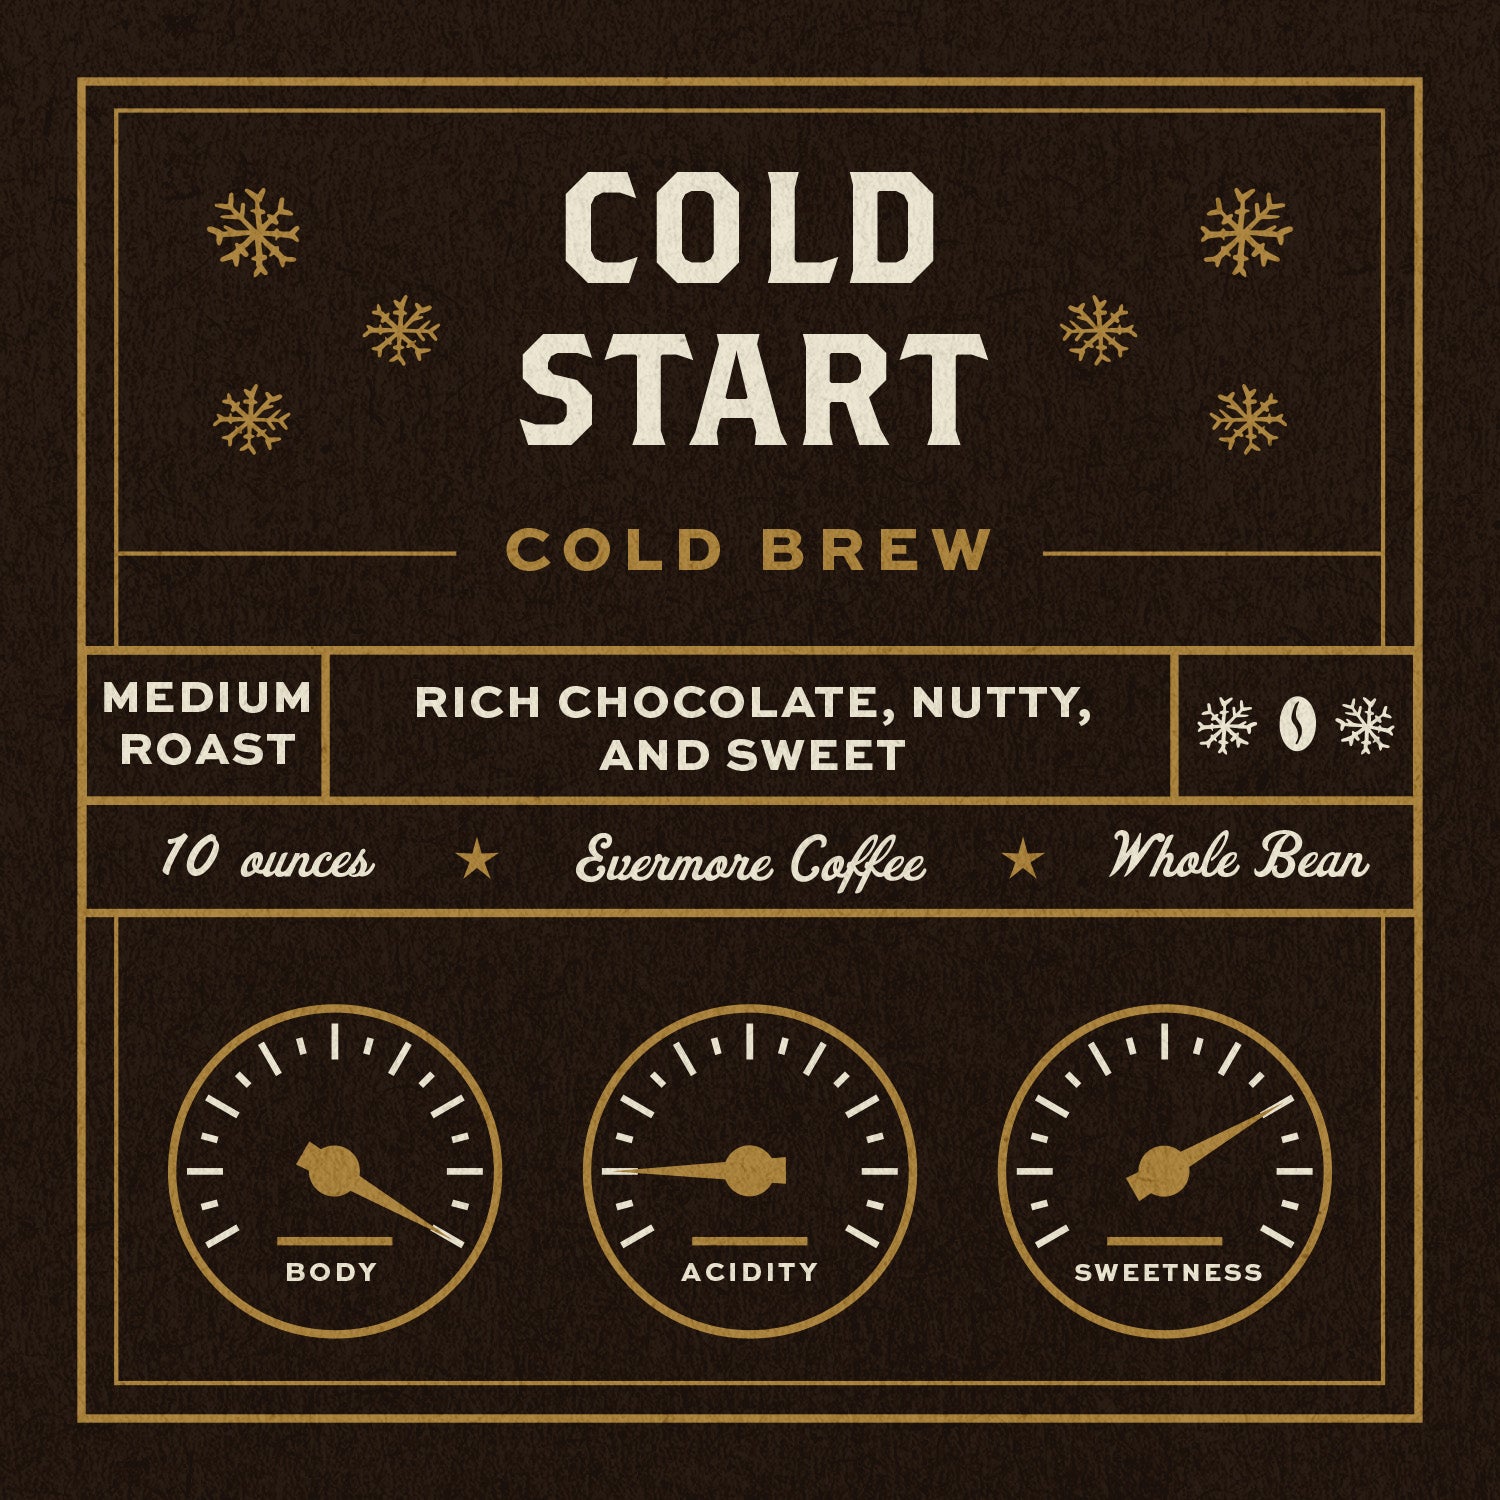 Cold Start Cold Brew - Two Bag Subscription